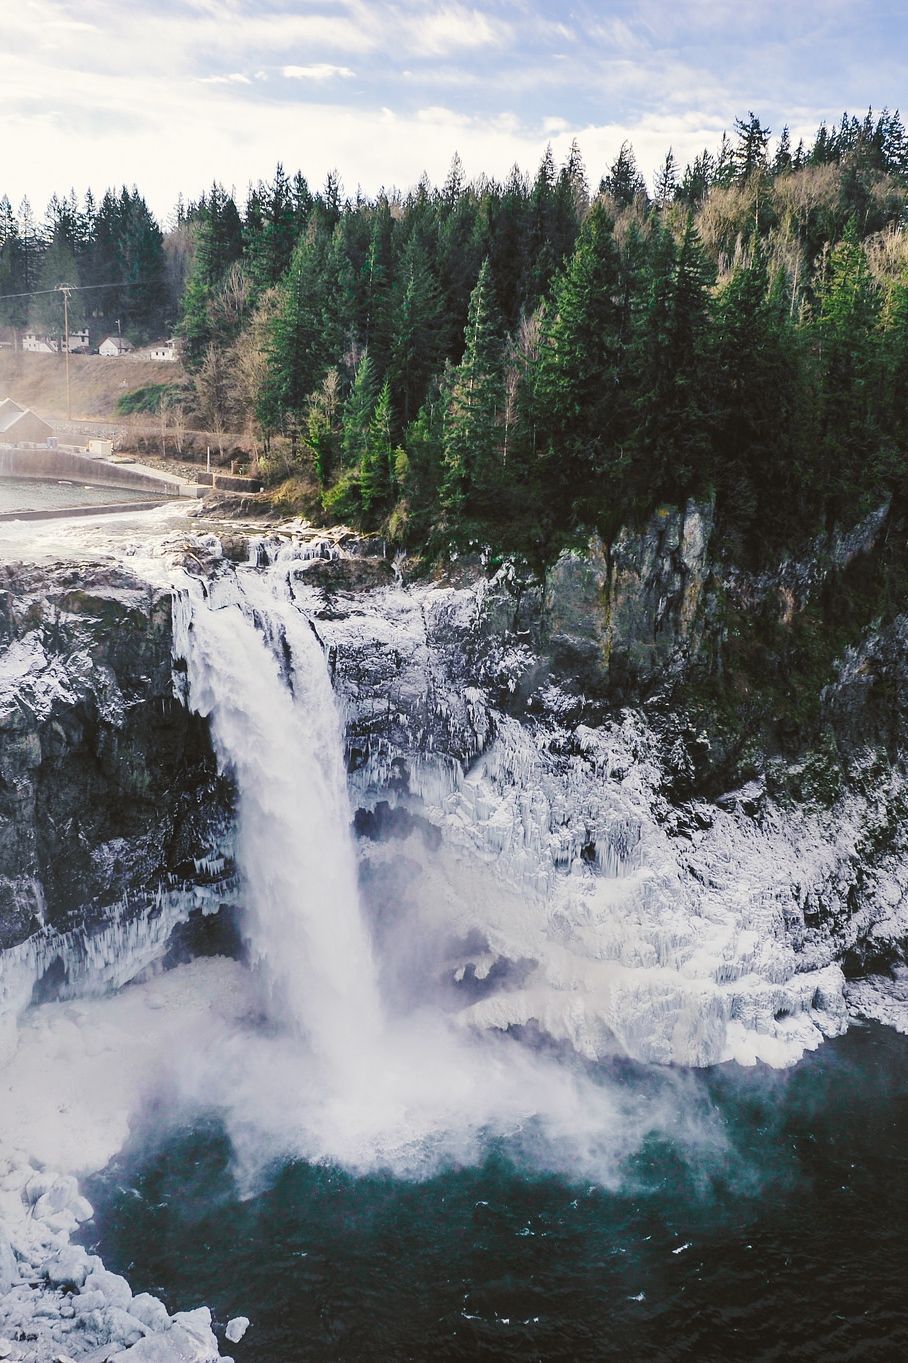 some of the beauty from my home state, Washington. Snoqualmie Falls.